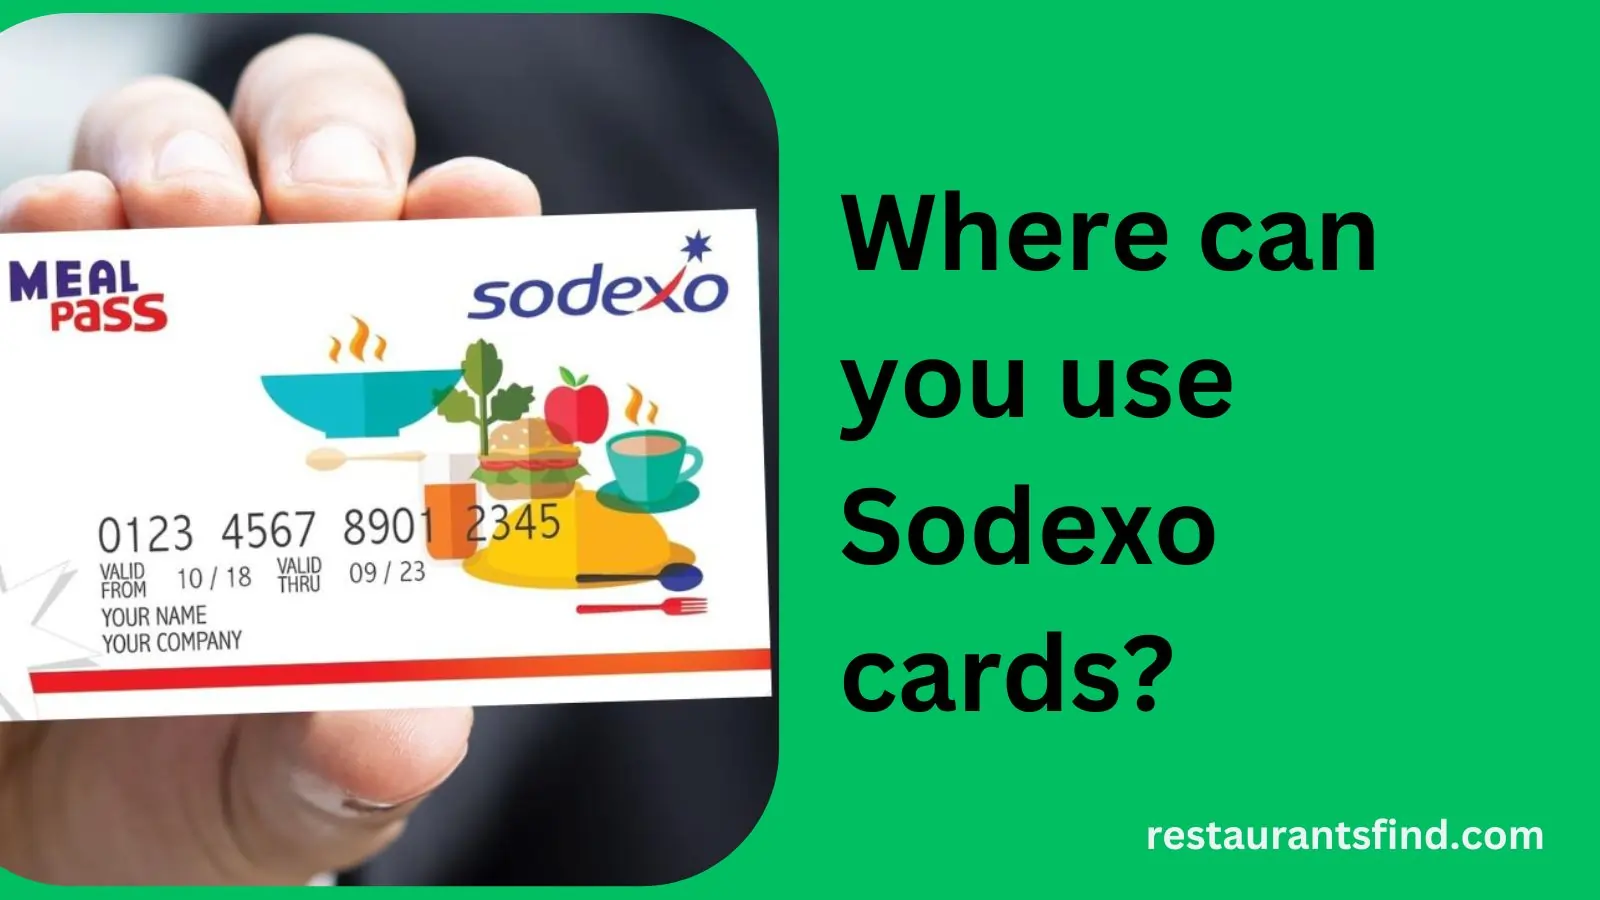 Where Can You Use Sodexo Cards?